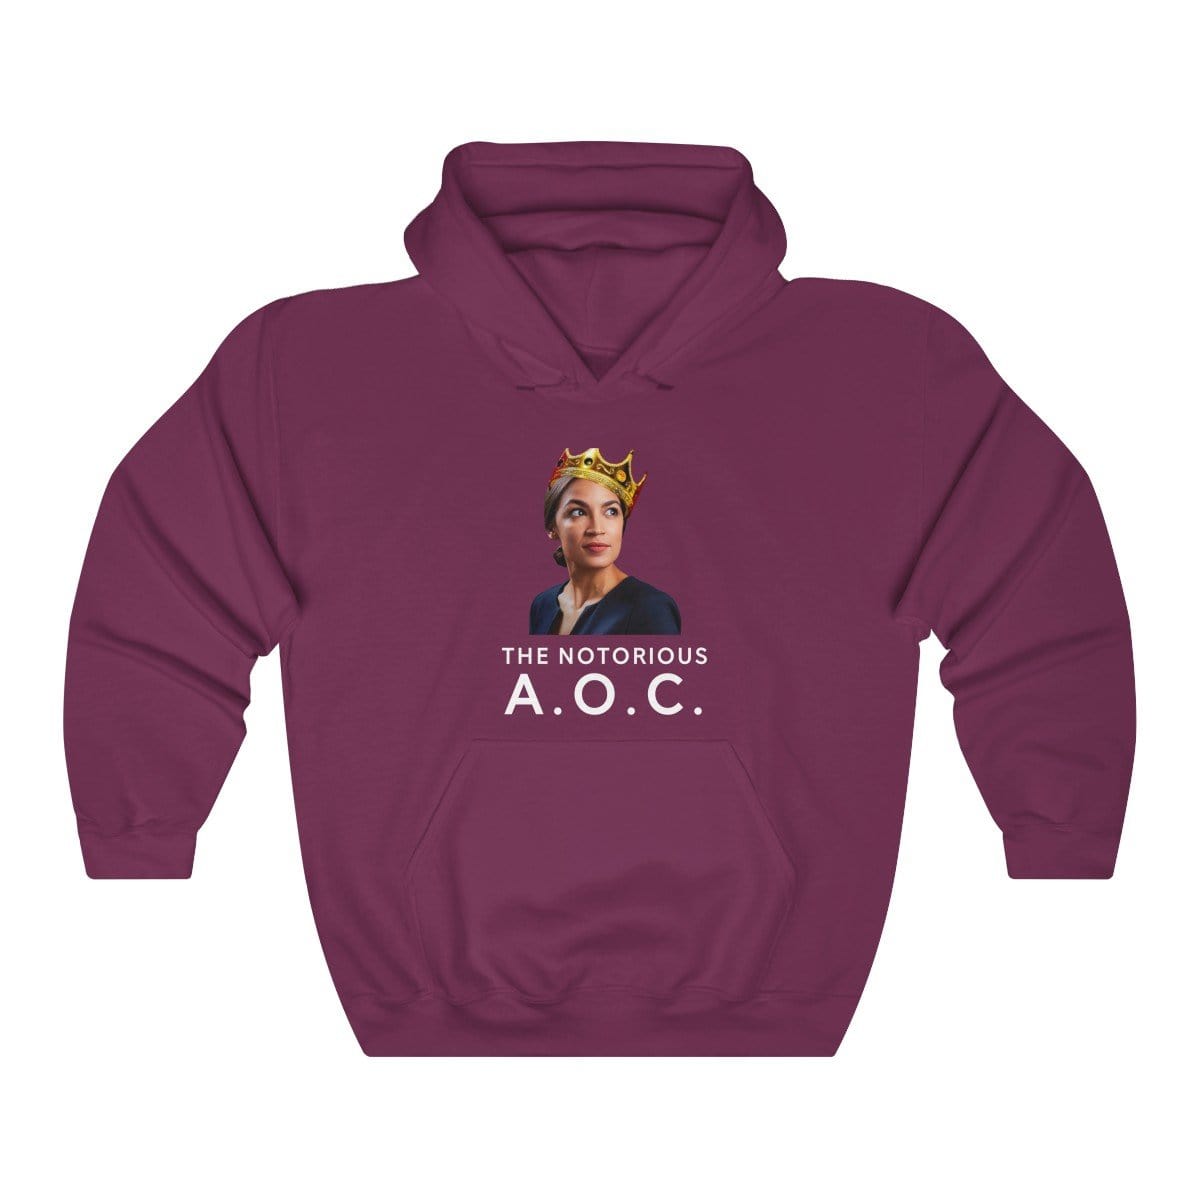 "The Notorious A.O.C." Unisex Hoodie - True Blue Gear